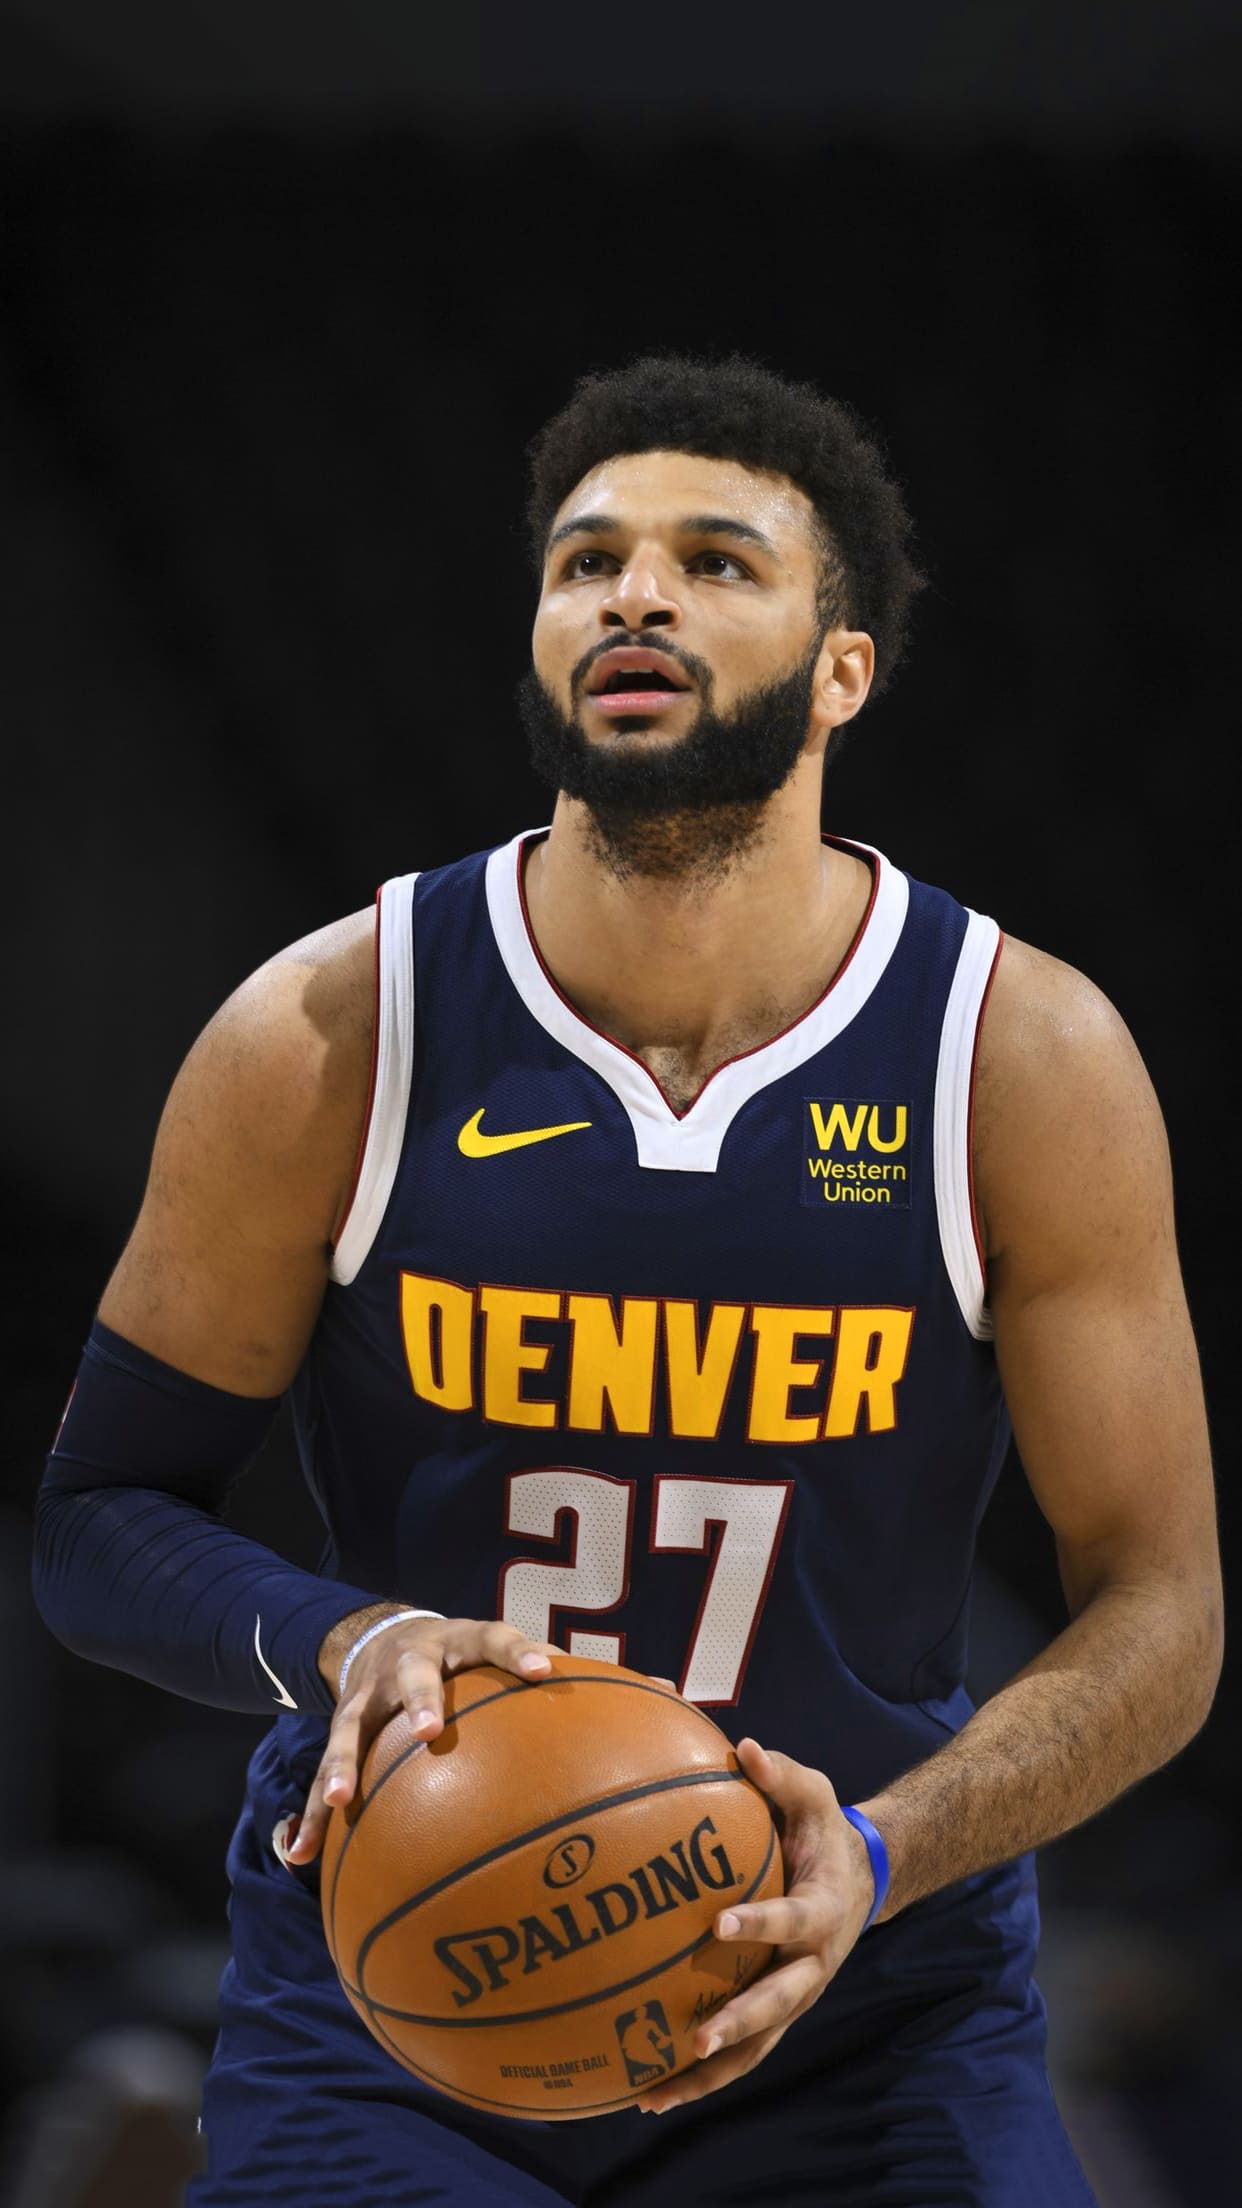 Denver Nuggets on Twitter New wallpapers who dis  WallpaperWednesdays  httpstcoHTh5ymBZJm  Twitter